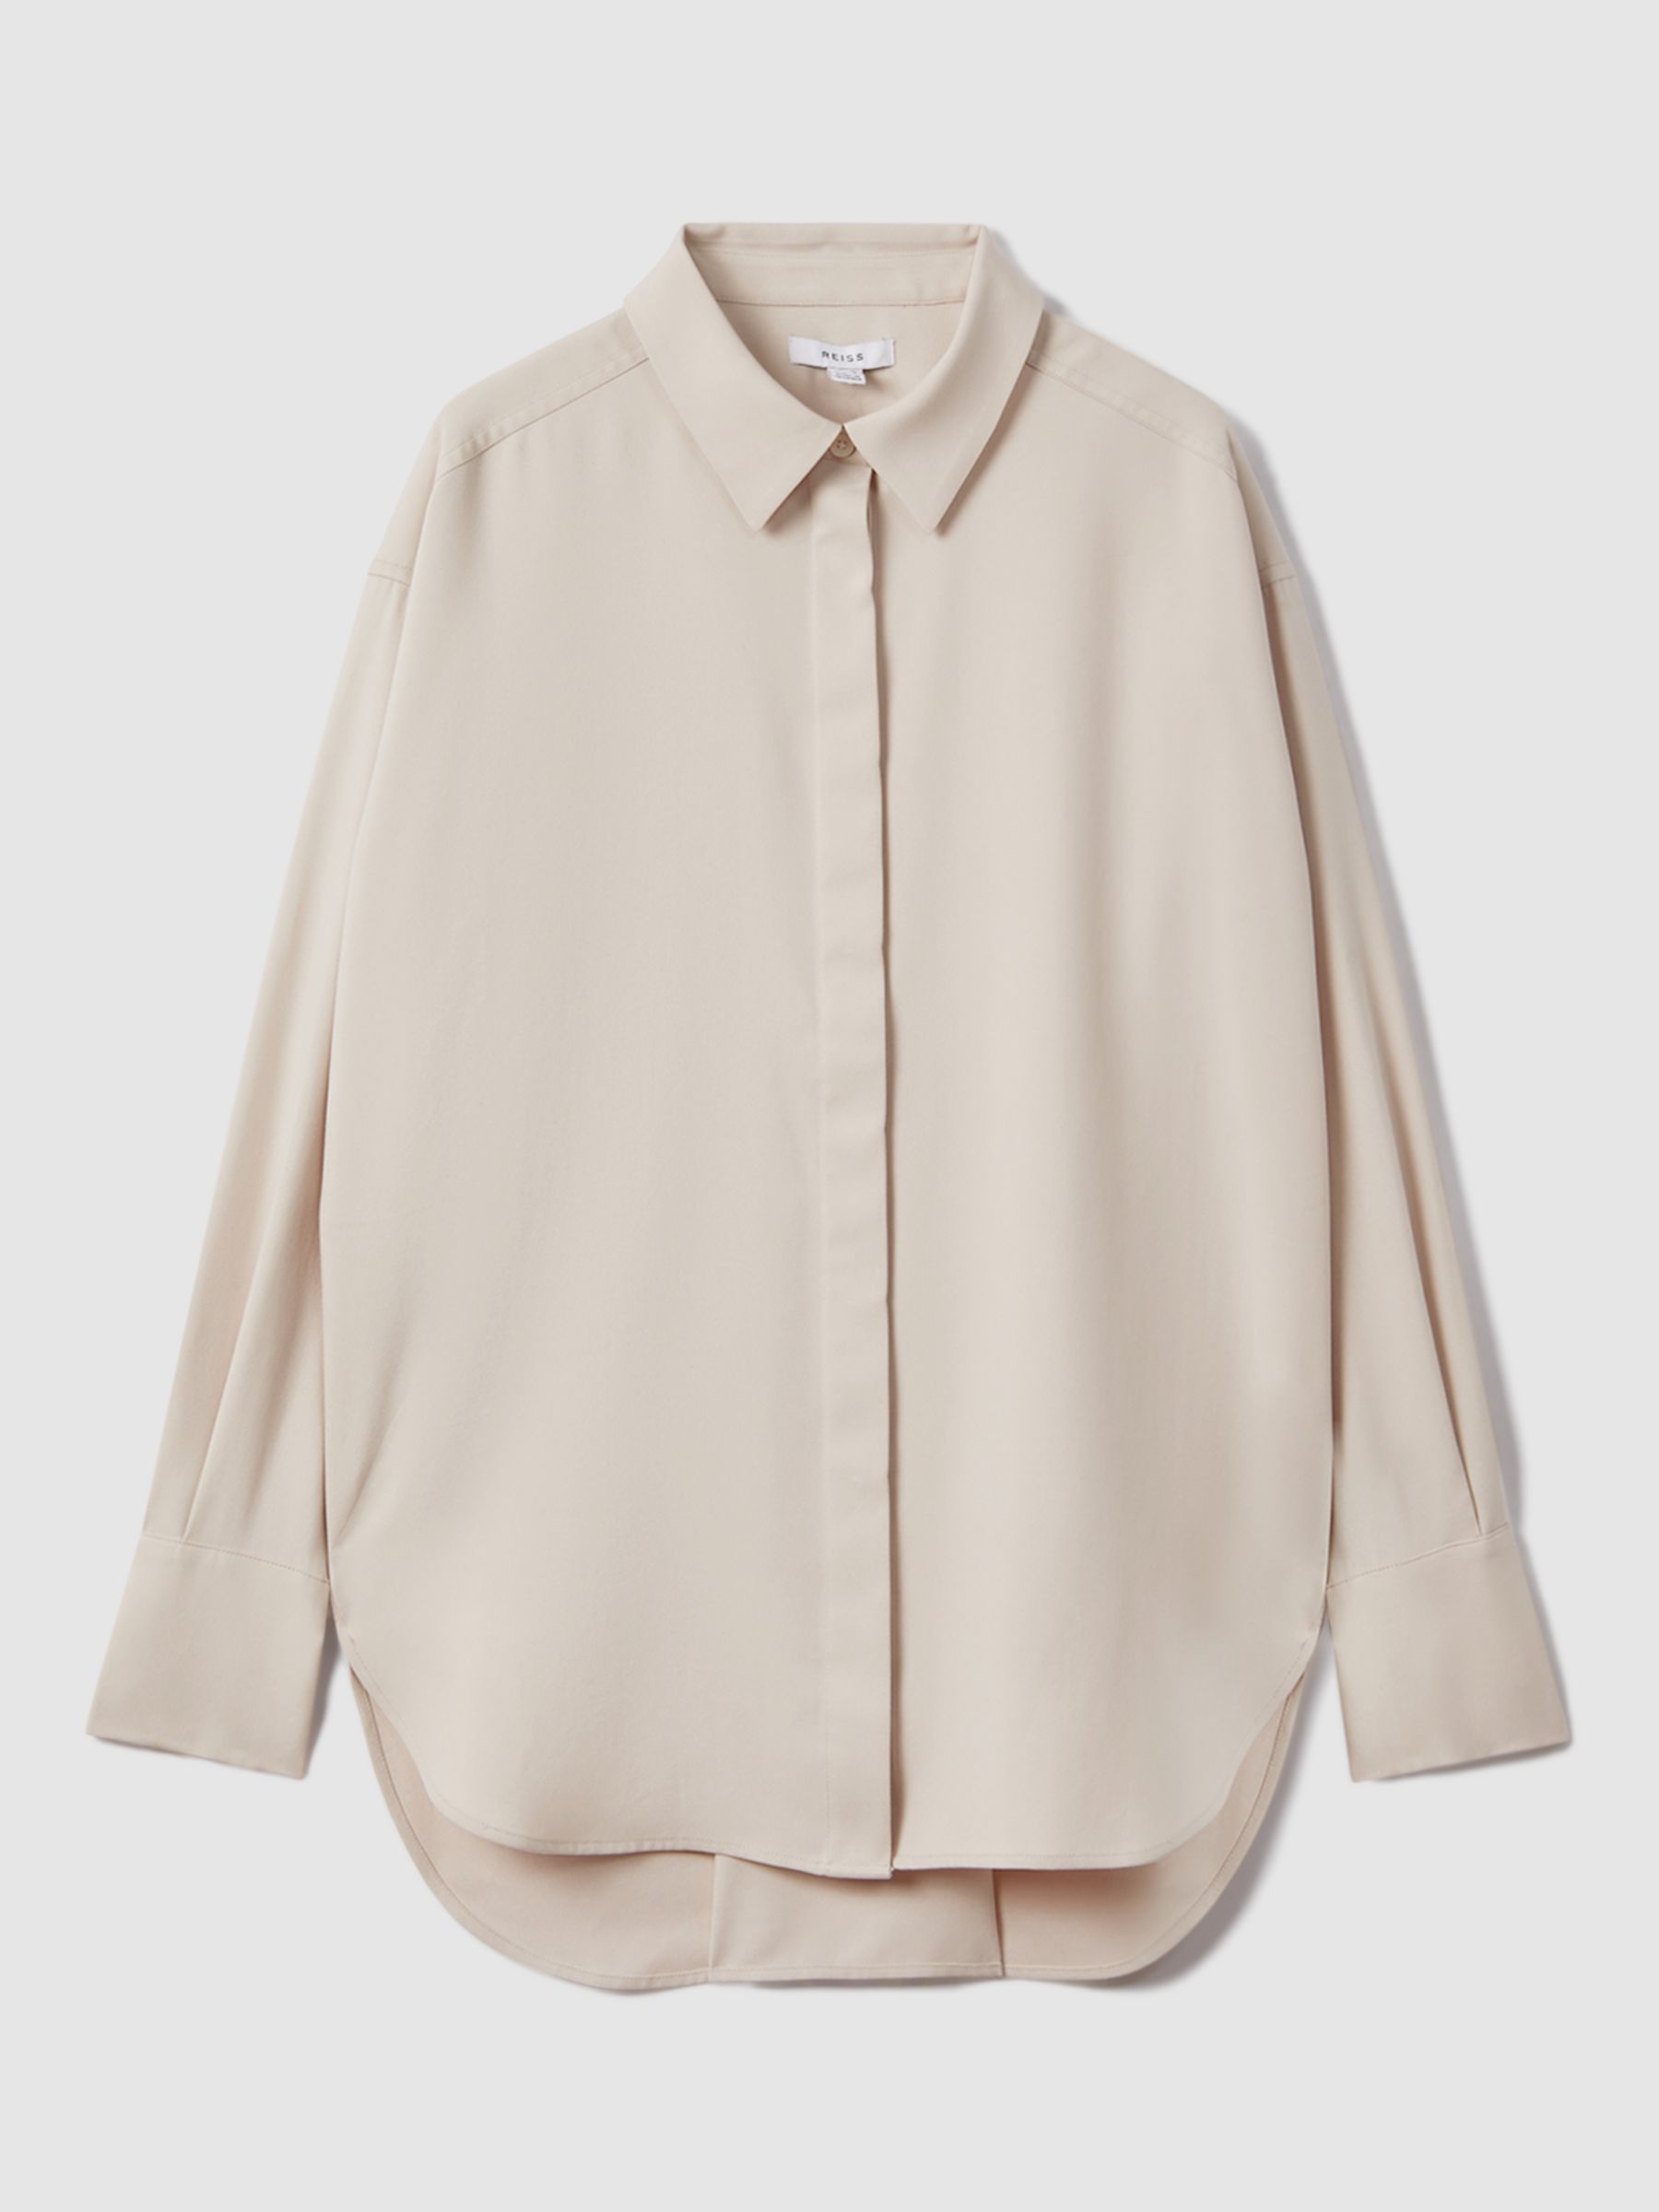 Buy Reiss Danielle Relaxed Fit Shirt, Stone Online at johnlewis.com